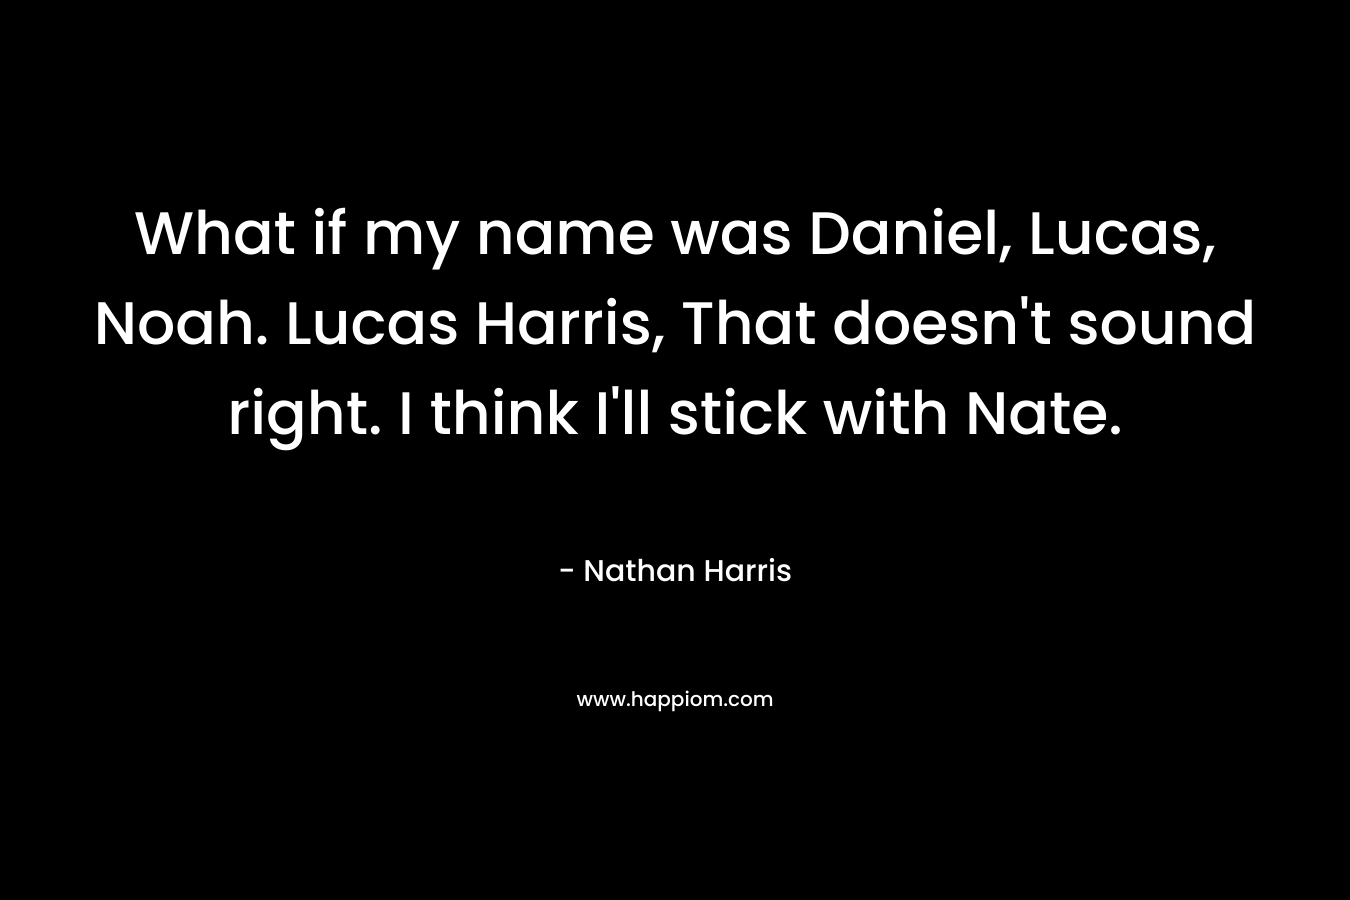 What if my name was Daniel, Lucas, Noah. Lucas Harris, That doesn't sound right. I think I'll stick with Nate.